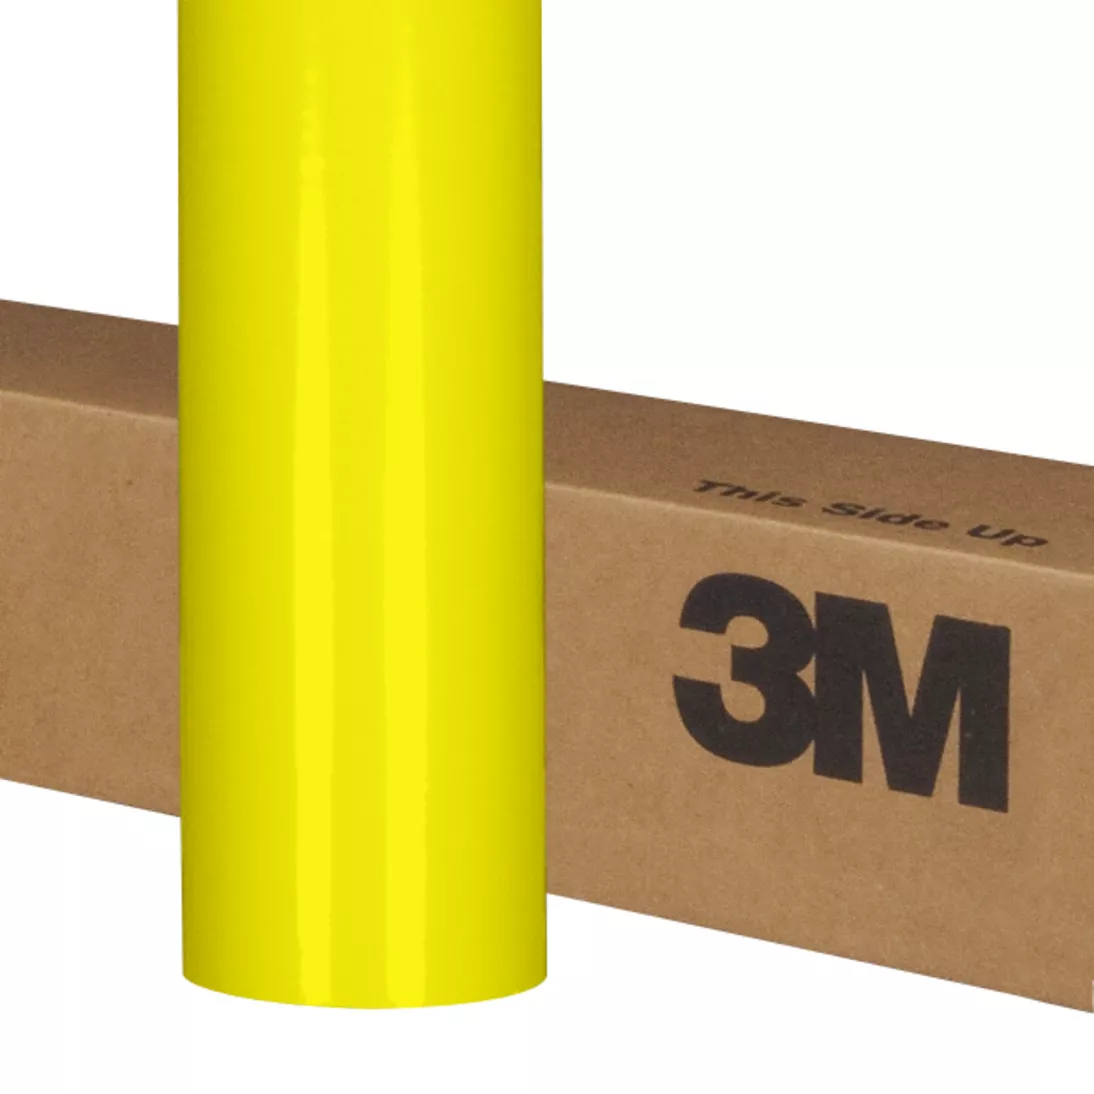 3M™ Scotchcal™ ElectroCut™ Graphic Film 7125-15, Bright Yellow, 48 in x
50 yd